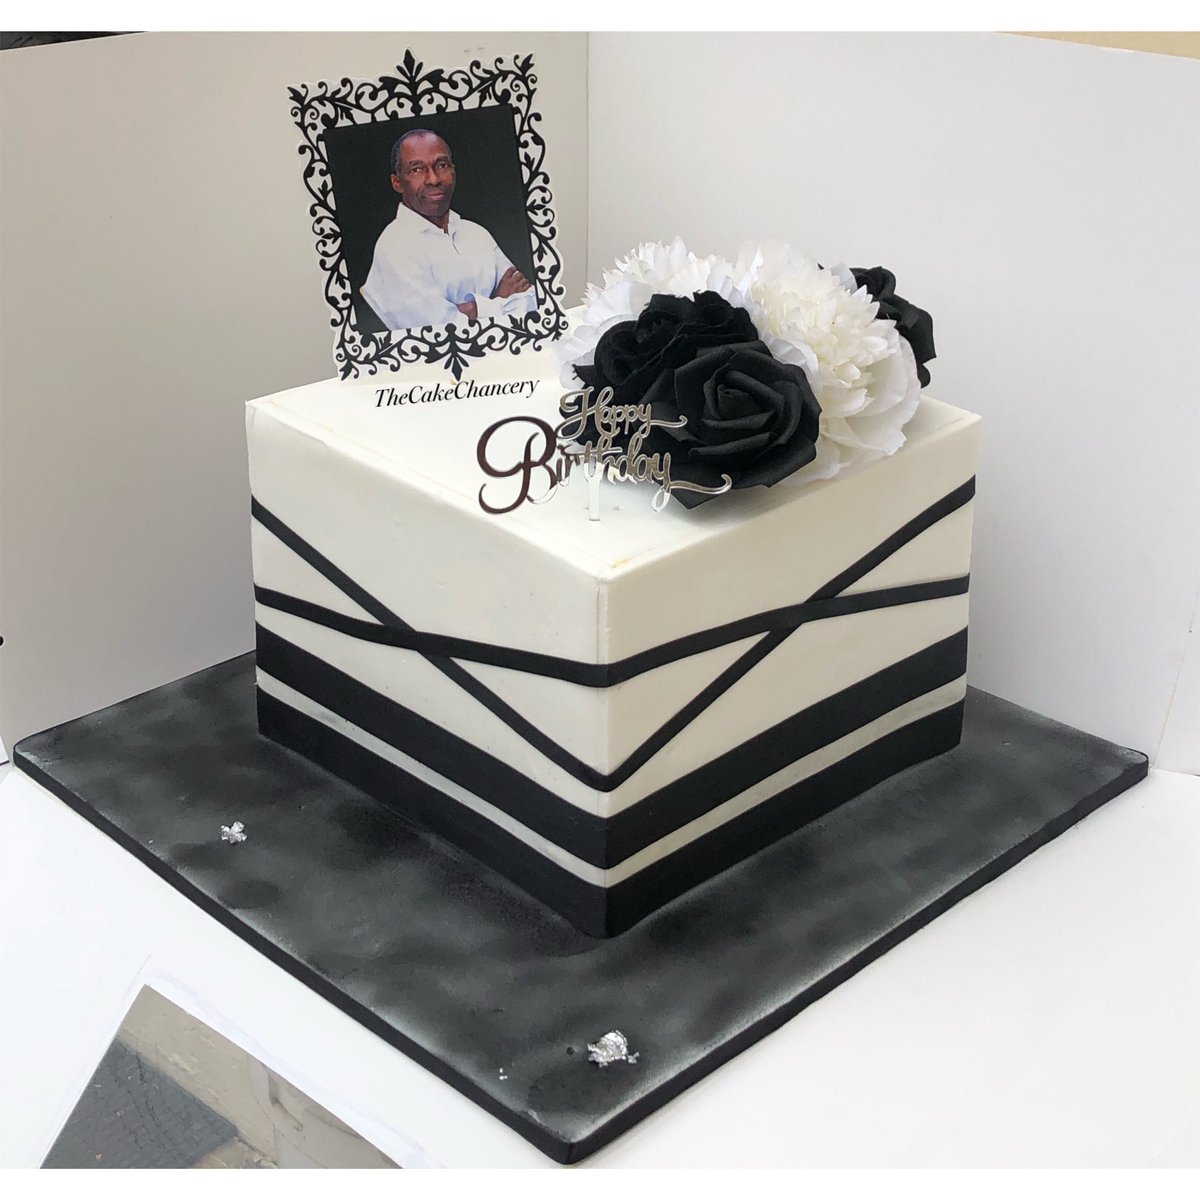 Pick up 👉Aare Avenue Bodija, Ibadan .
There’s one uniqueness that comes with square shaped cake designs..
I love this one in particular.
- Sharp Edges ✅
- neatness ✅
- details ✅..
Please retweet 🙏🙏🙏🙏
#IbadanBaker #BakerInIbadan